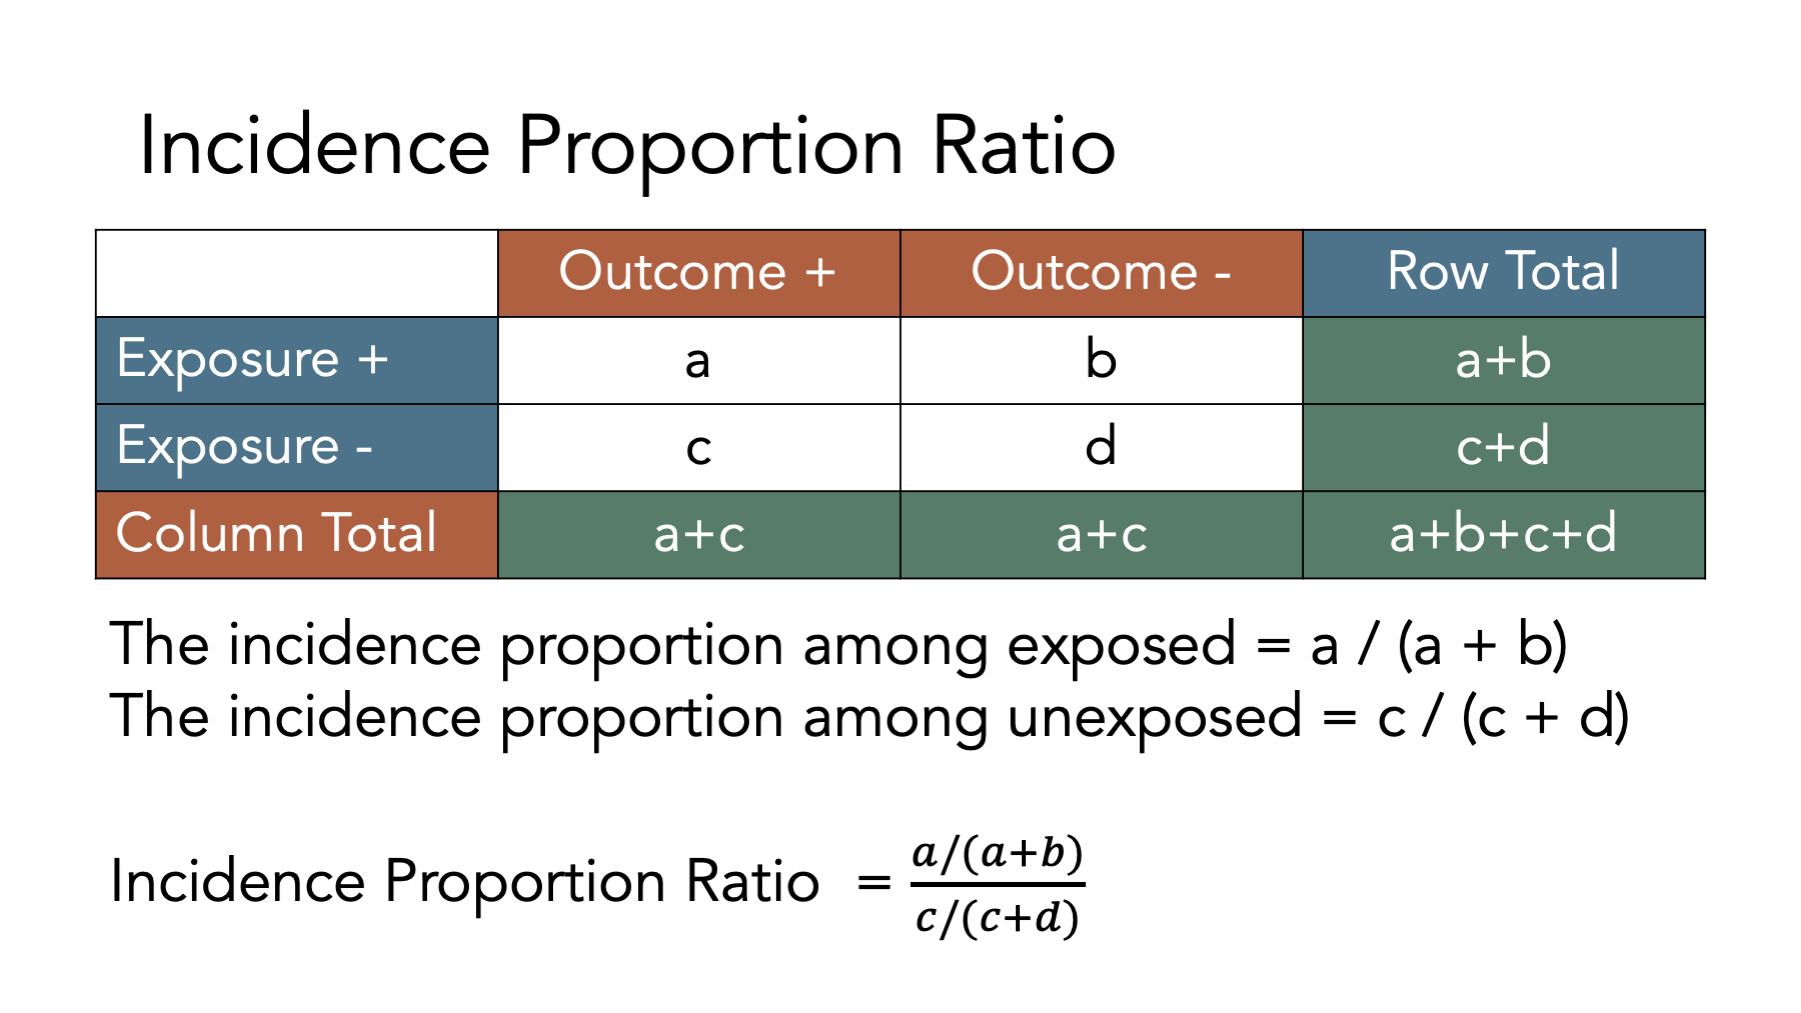 Calculating incidence proportion ratios